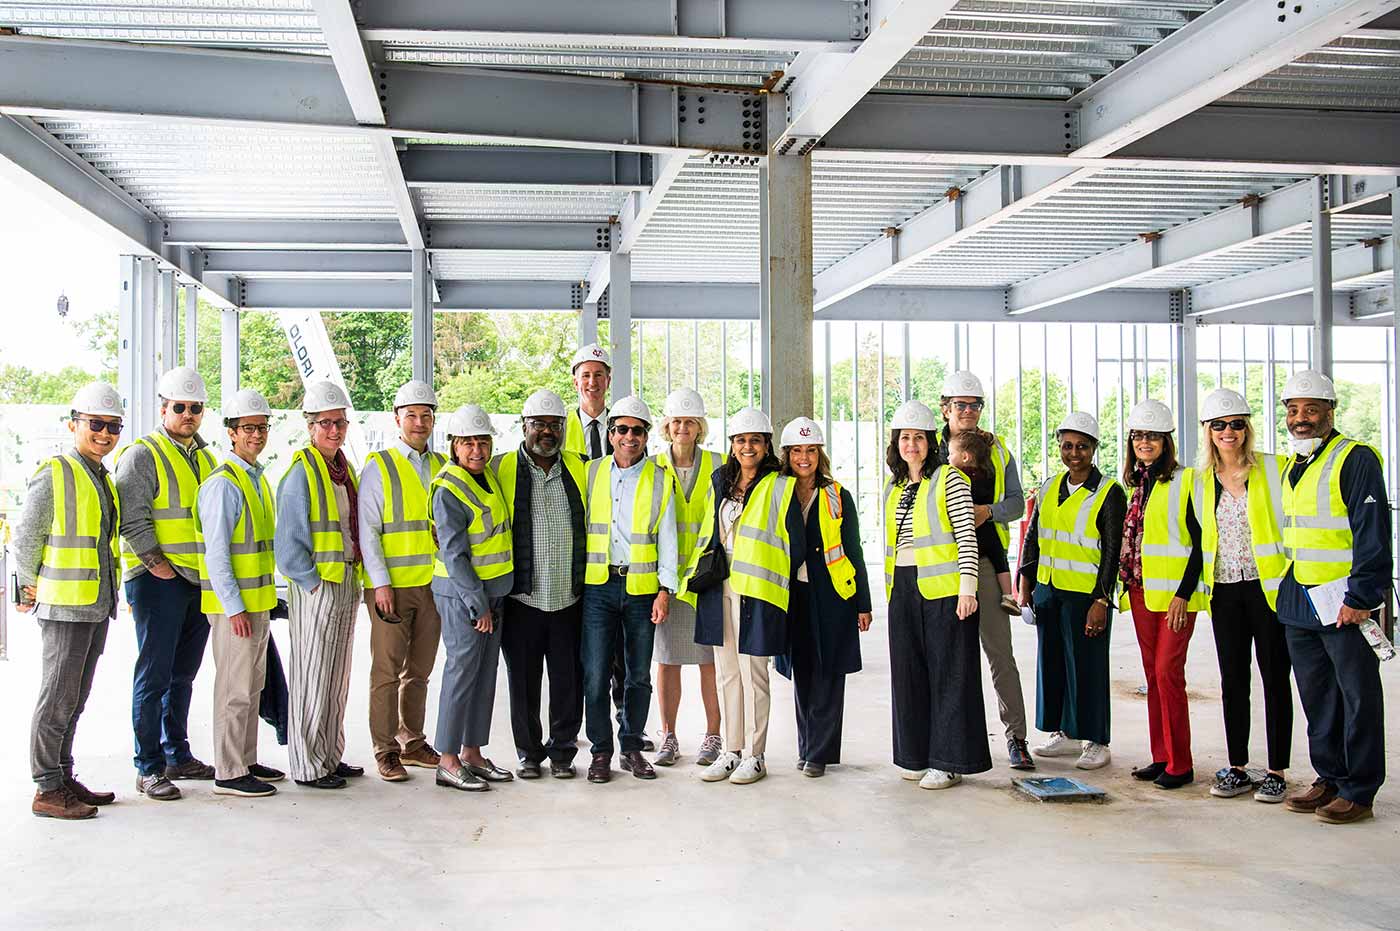 A group of nearly 20 people stand in an unfinished building that is being constructed, smiling at the camera, wearing fluorescent green vests and helmets.